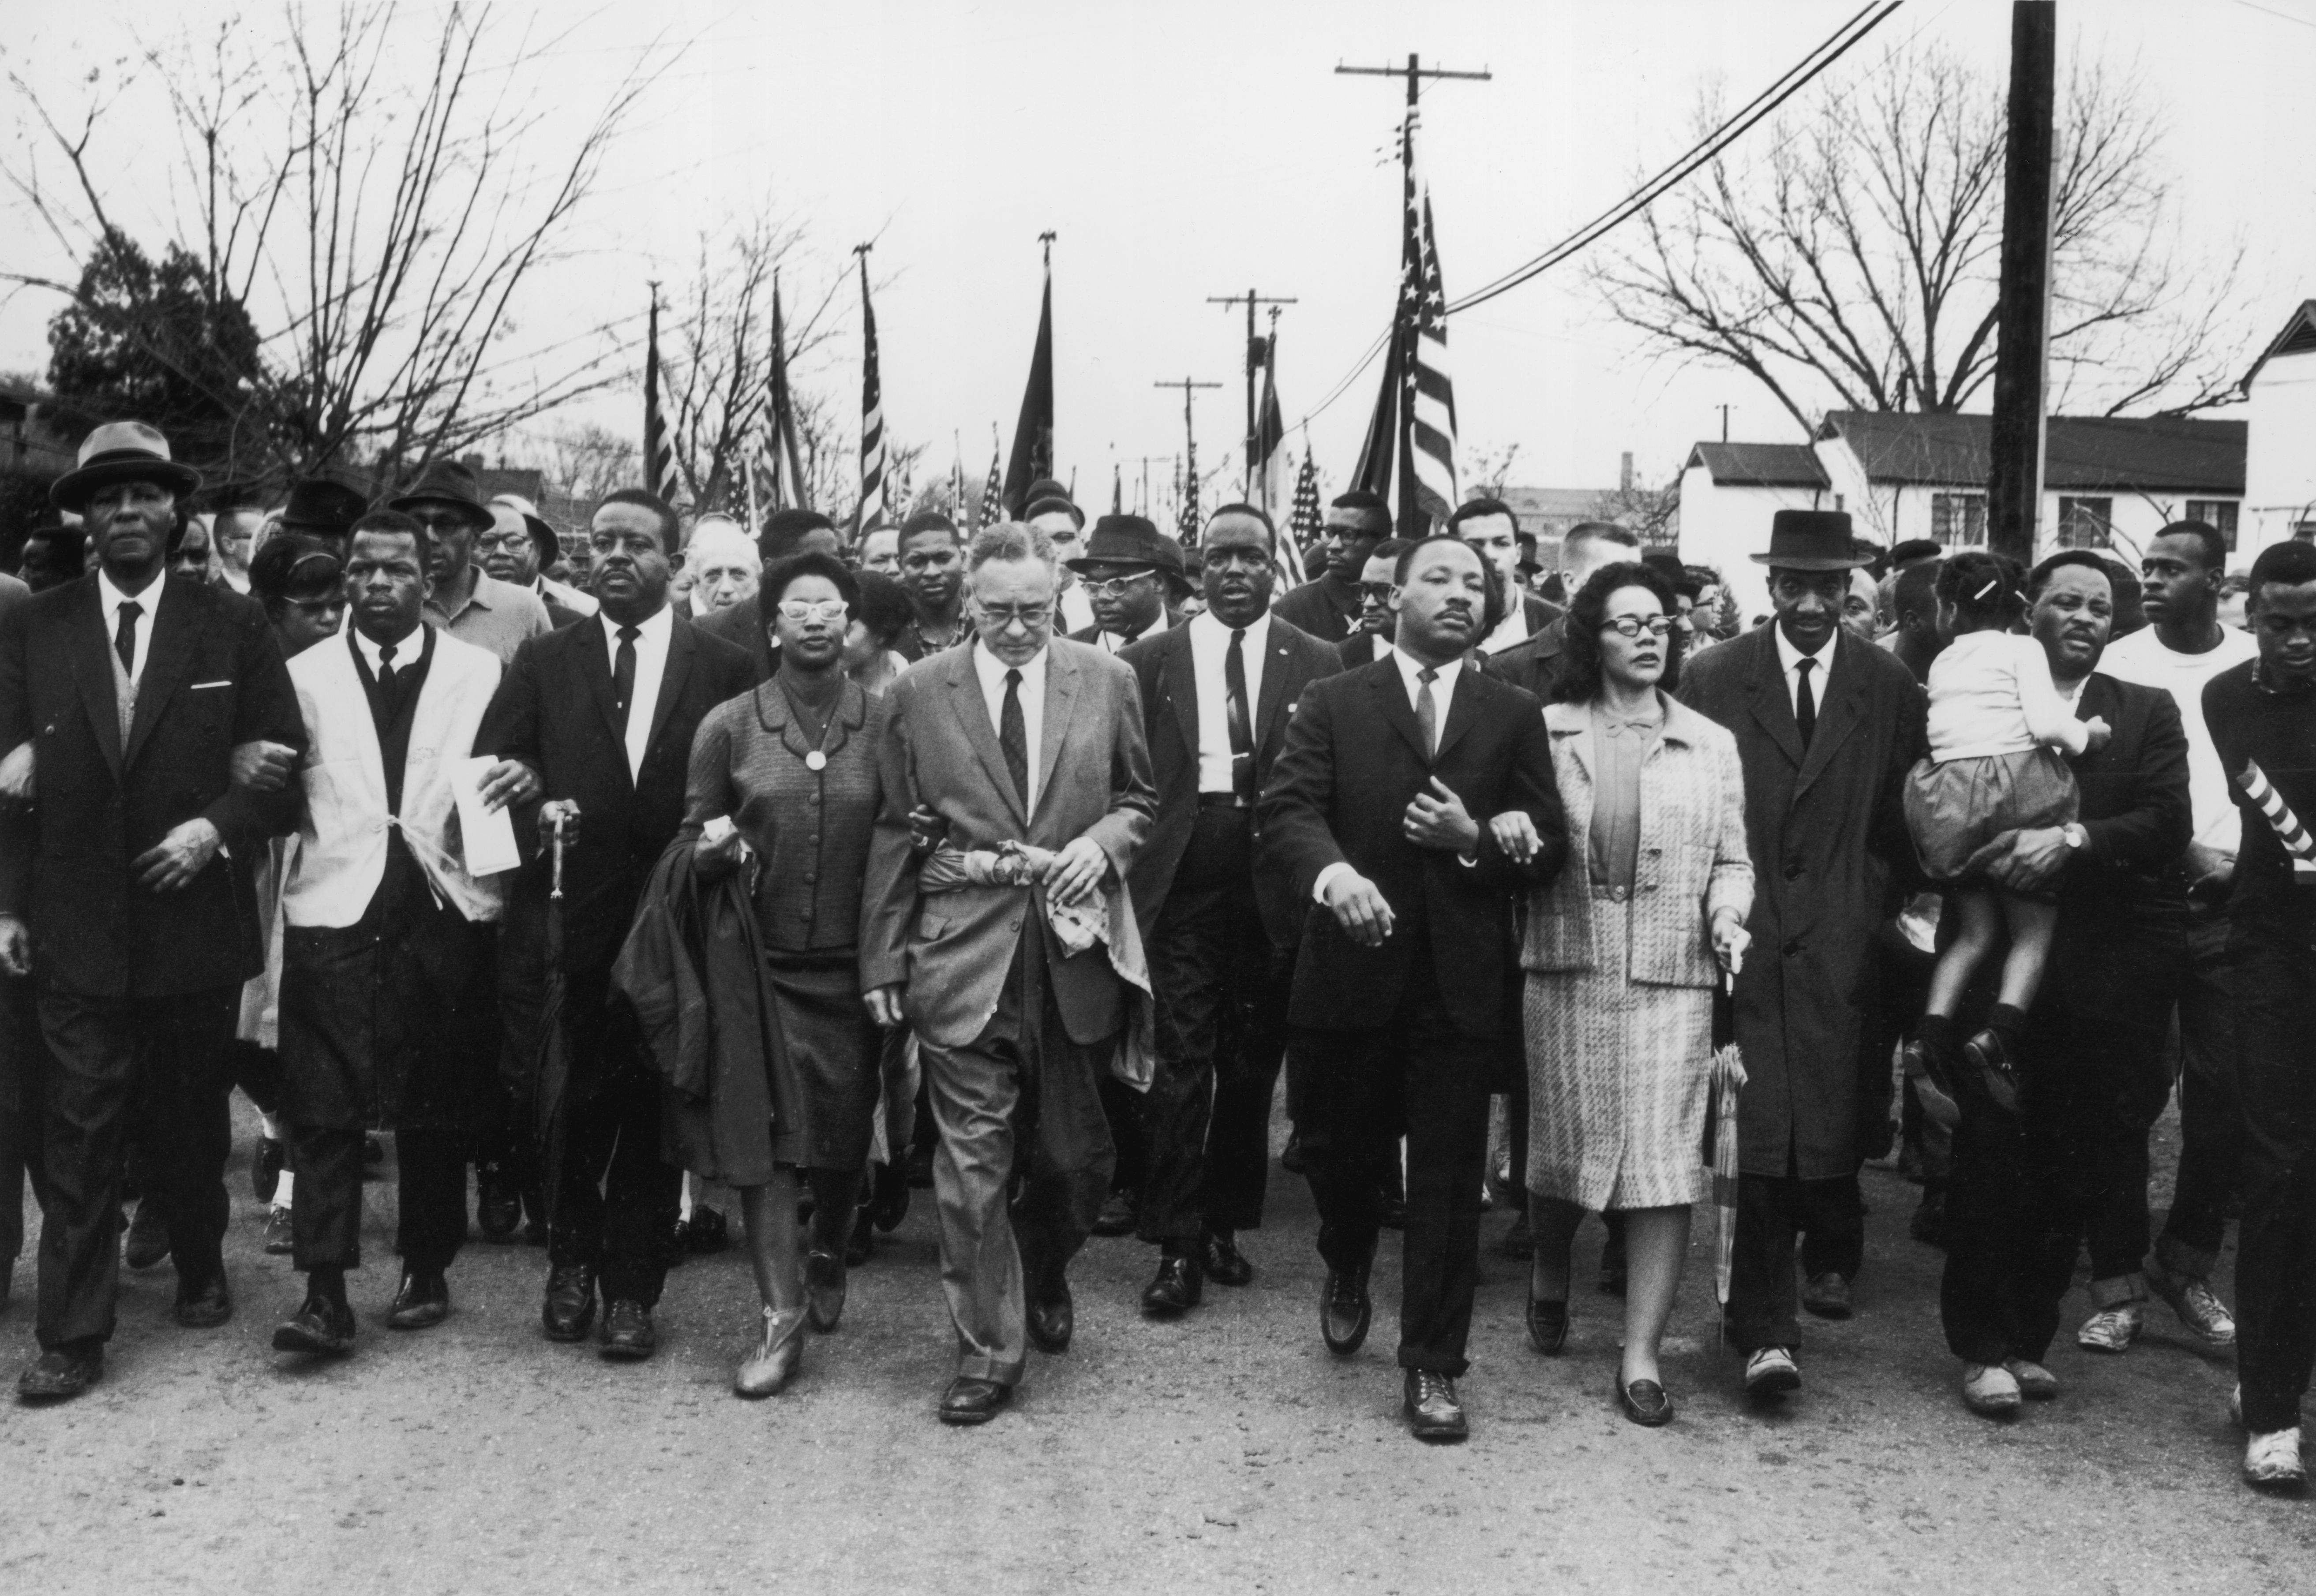 Martin Luther King, Jr., and his wife Coretta Scott King lead a black voting rights march on March 30, 1965, in Alabama.